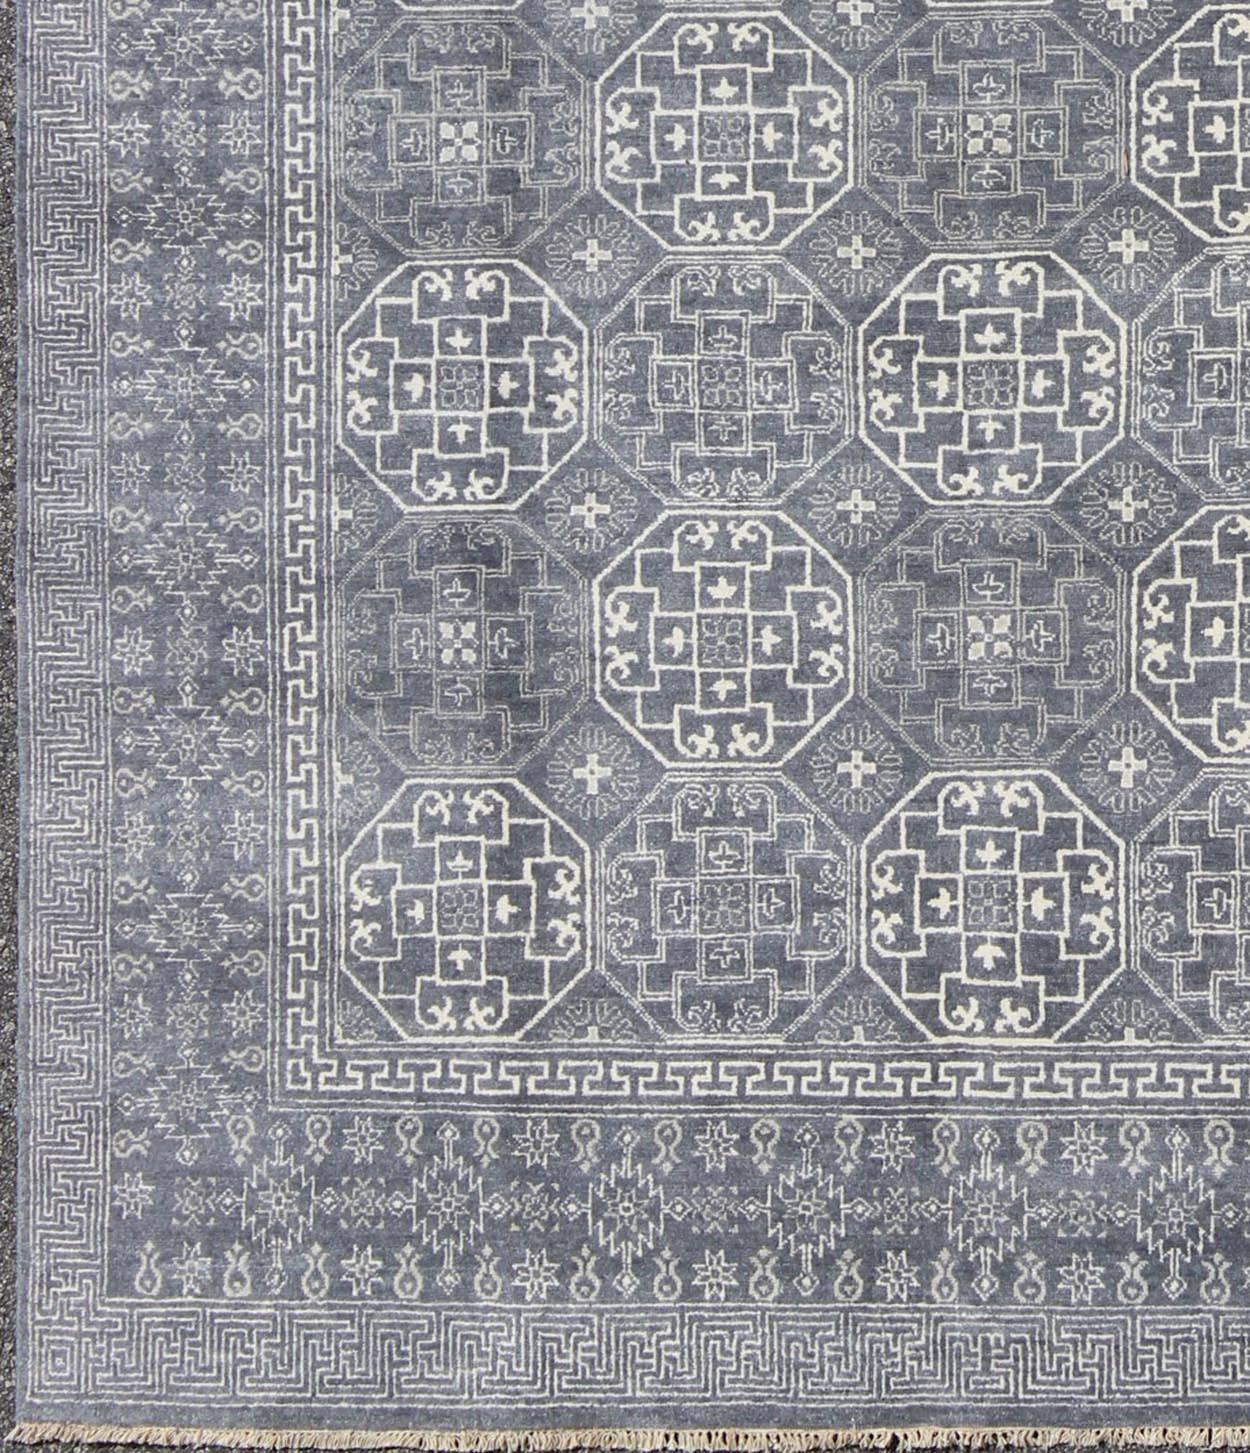 Antique reproduction Khotan rug in shades of gray and blue. Keivan Woven Arts /  rug IN-BAM-59077, country of origin / type: Turkestan / Khotan, 2018.
Measures: 7'11 x 9'10.
This attractive reproduction Khotan rug is a spectacular testament to the